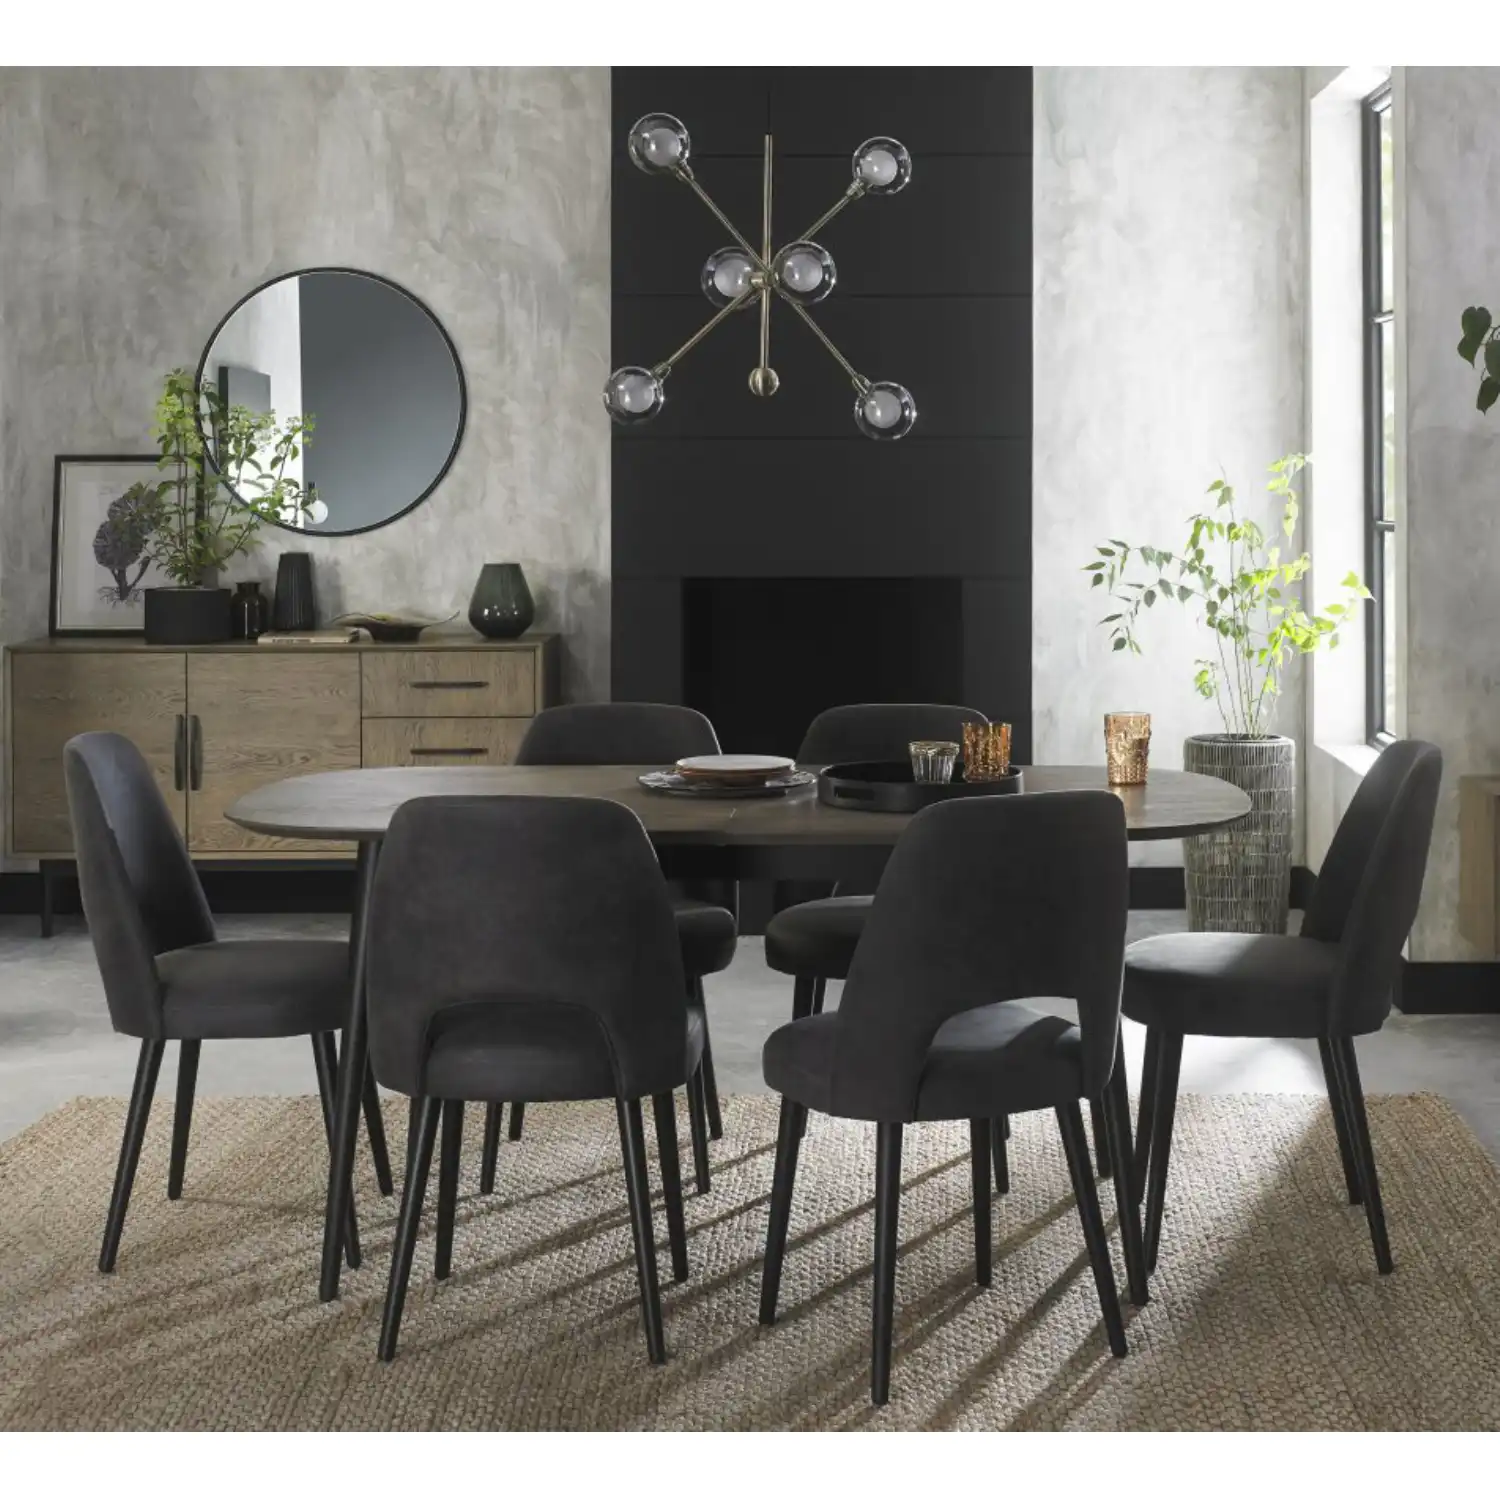 Oval Weathered Dark Oak Extending Dining Set 6 Grey Chairs